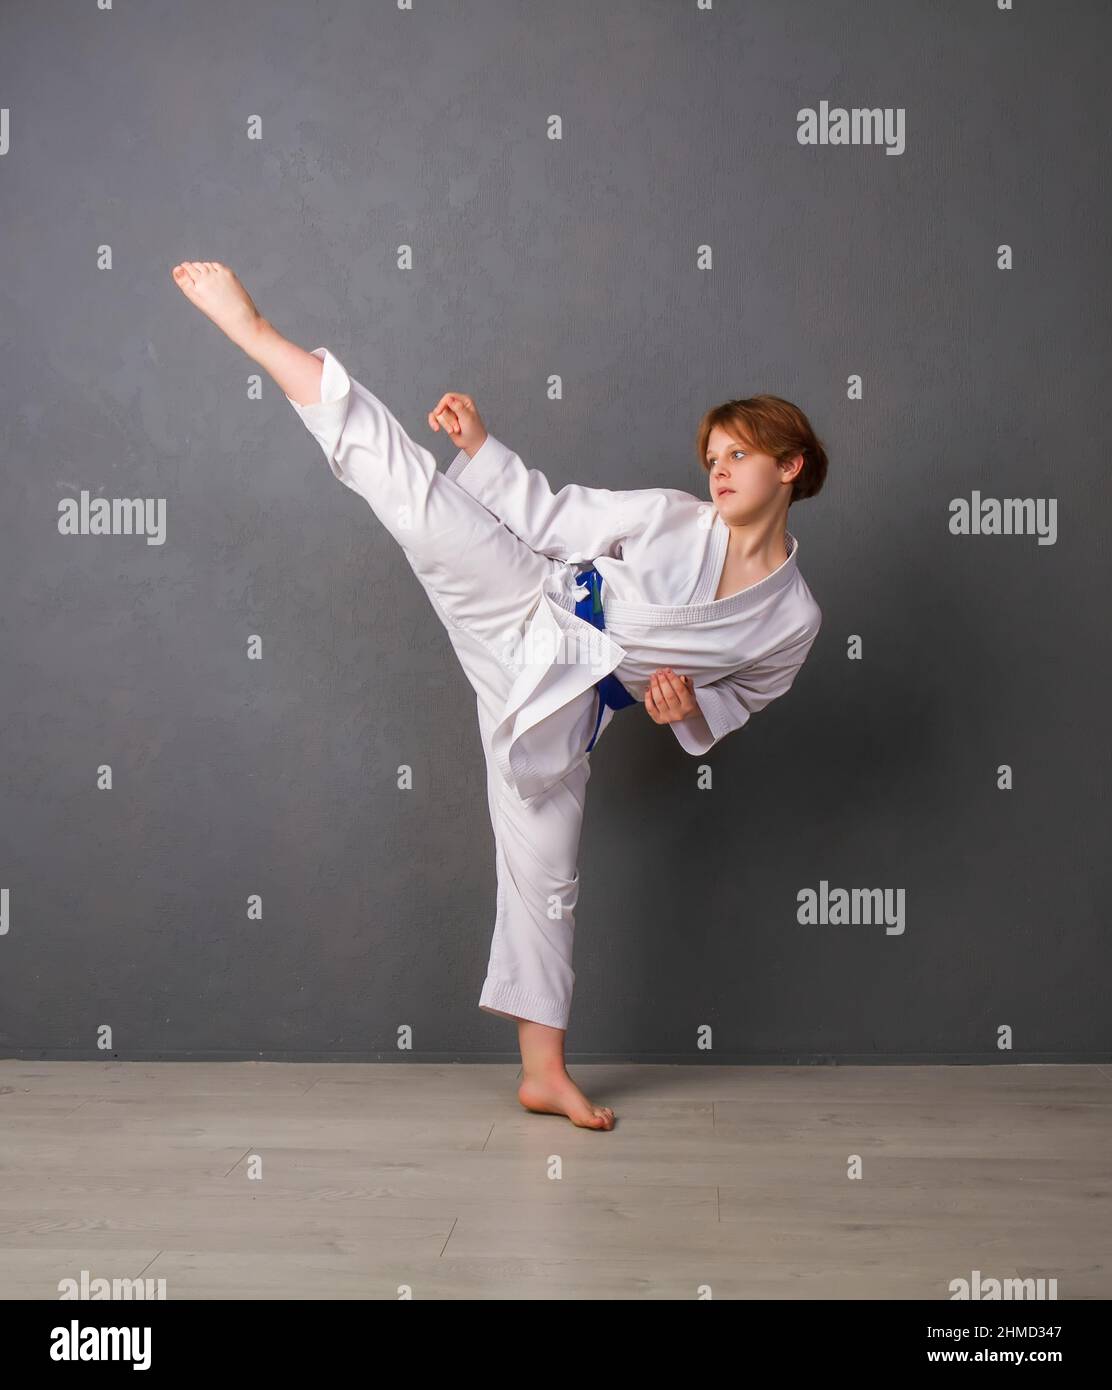 A young girl karateka in a white kimono and a blue belt trains and performs a set of exercises against a gray wall Stock Photo